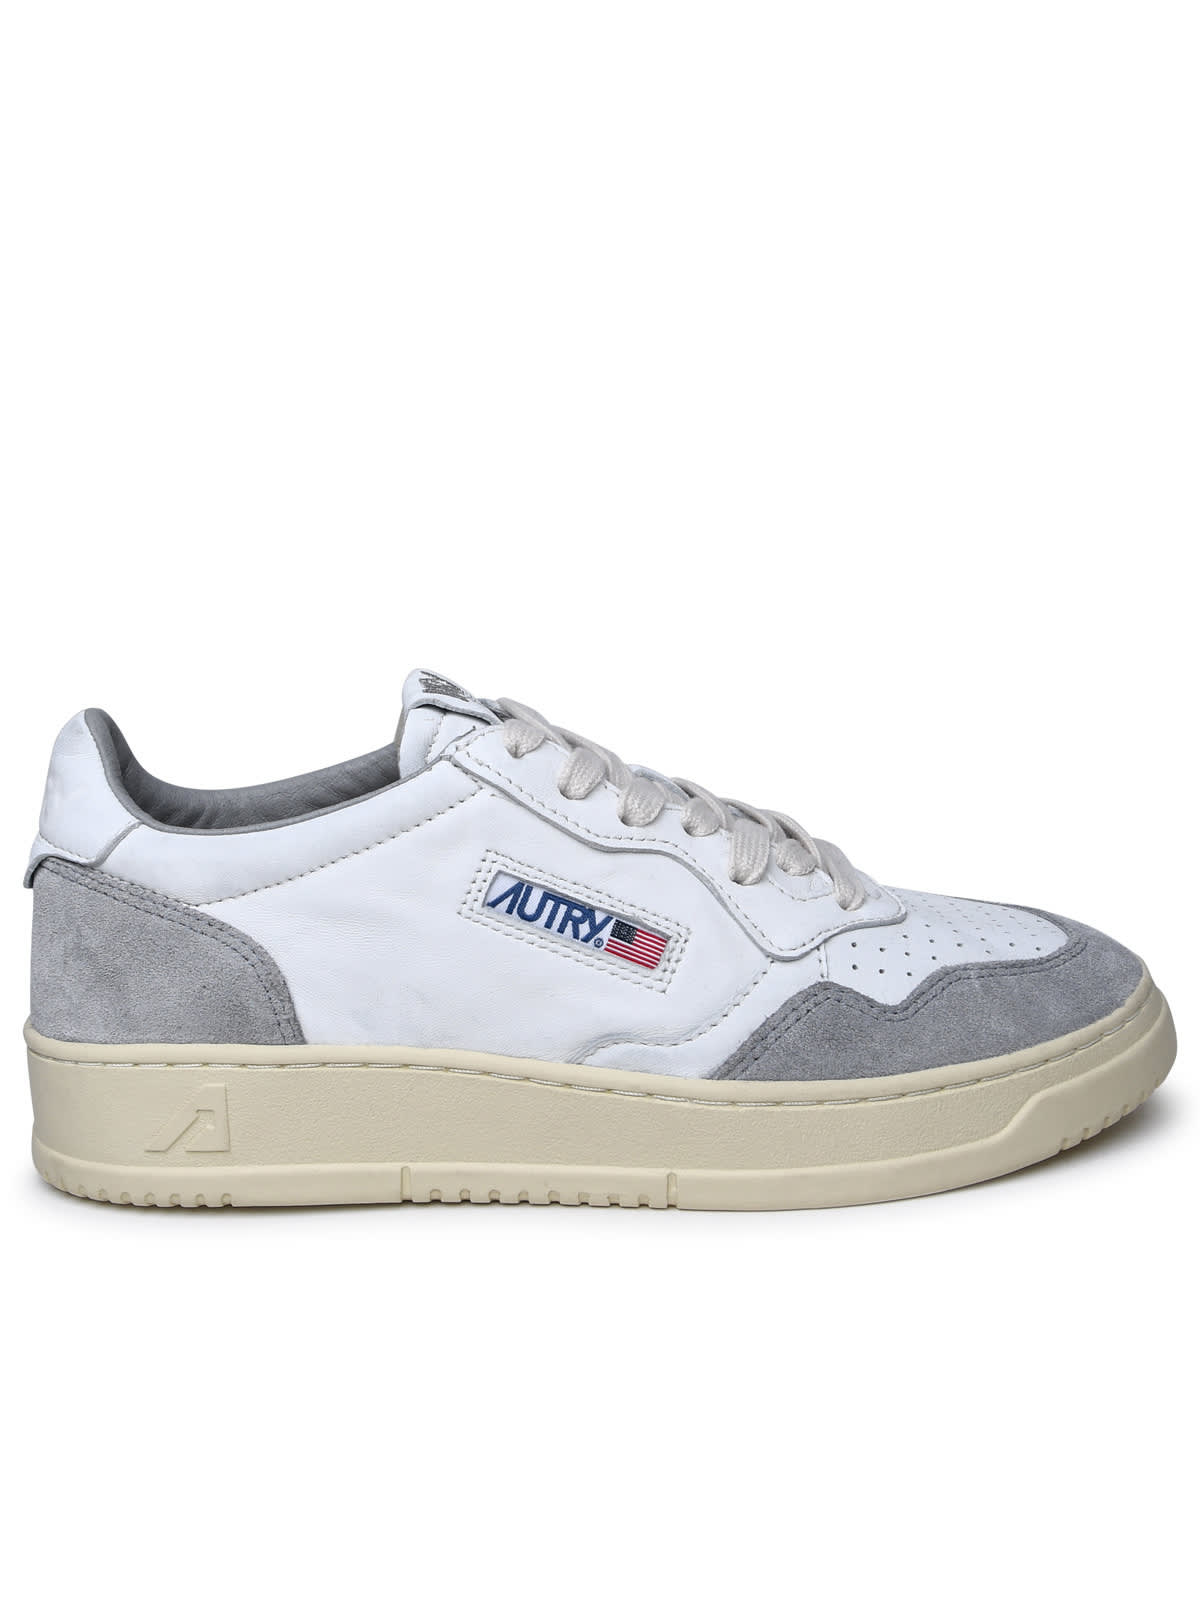 Autry Two-tone Leather Sneakers In Bianco Grigio